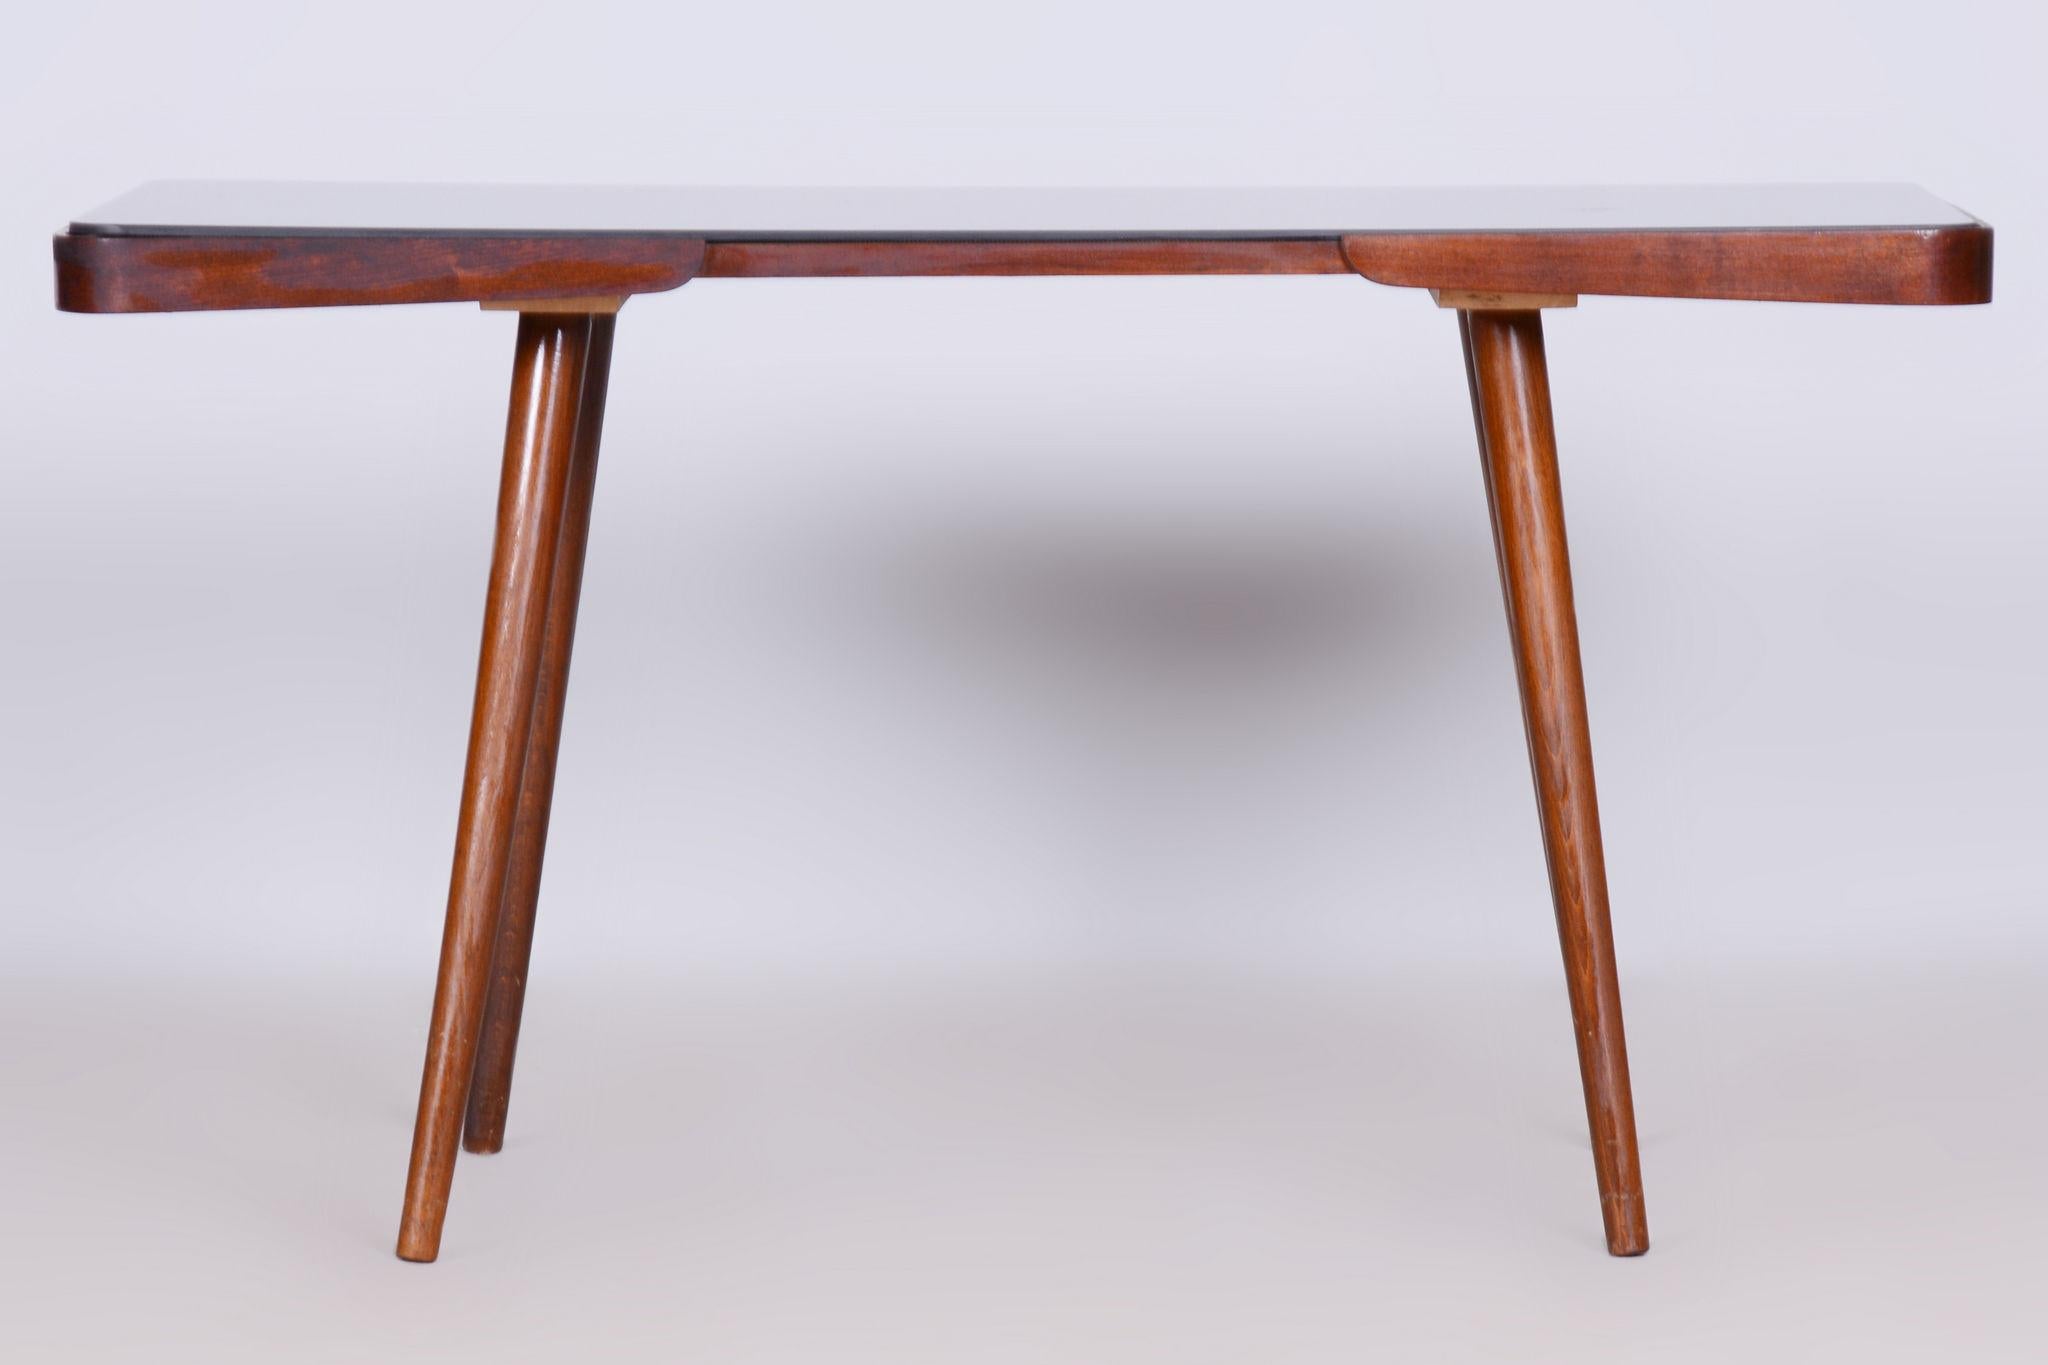 Original MidCentury Beech Coffee Table Made By Interier Praha

Maker: Interier Praha
Source: Czechia 
Period: 1960-1969
Material: Beech, Opaxit Glass
Well-preserved condition.
Revived polish.

Made by Interier Praha, The state furniture company in